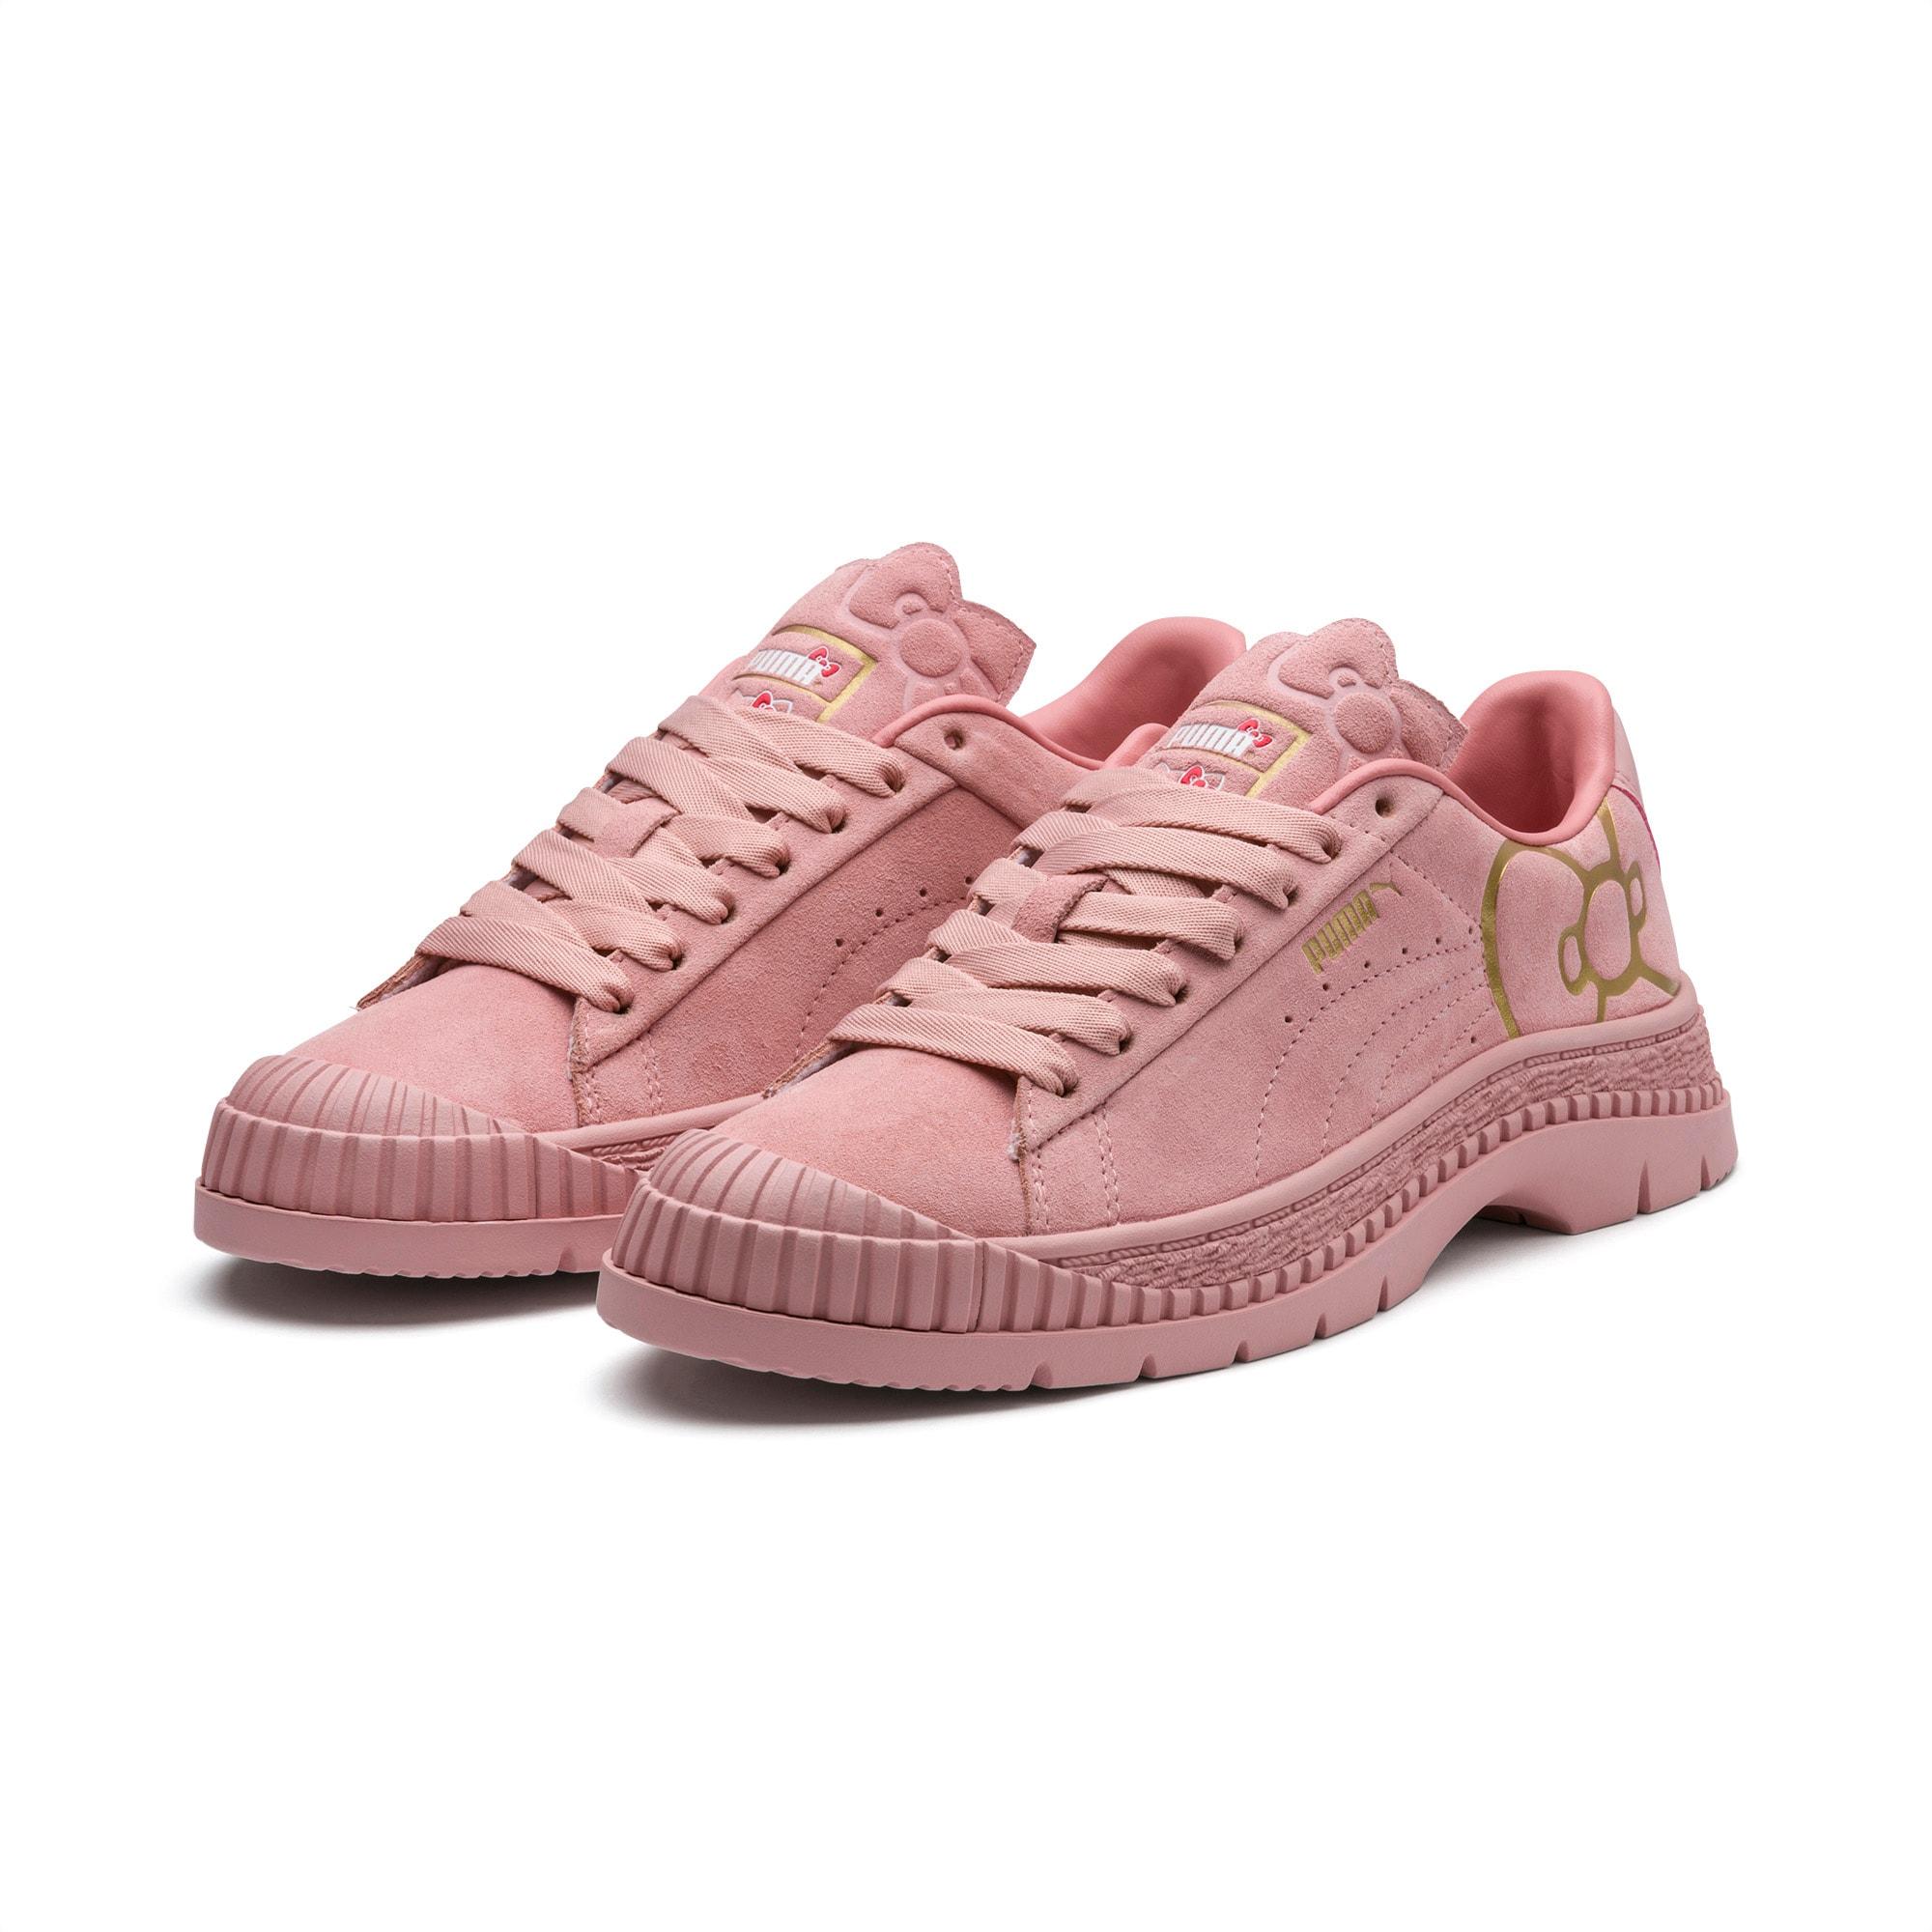 PUMA Suede X Hello Kitty Utility Women's Sneakers in Pink | Lyst